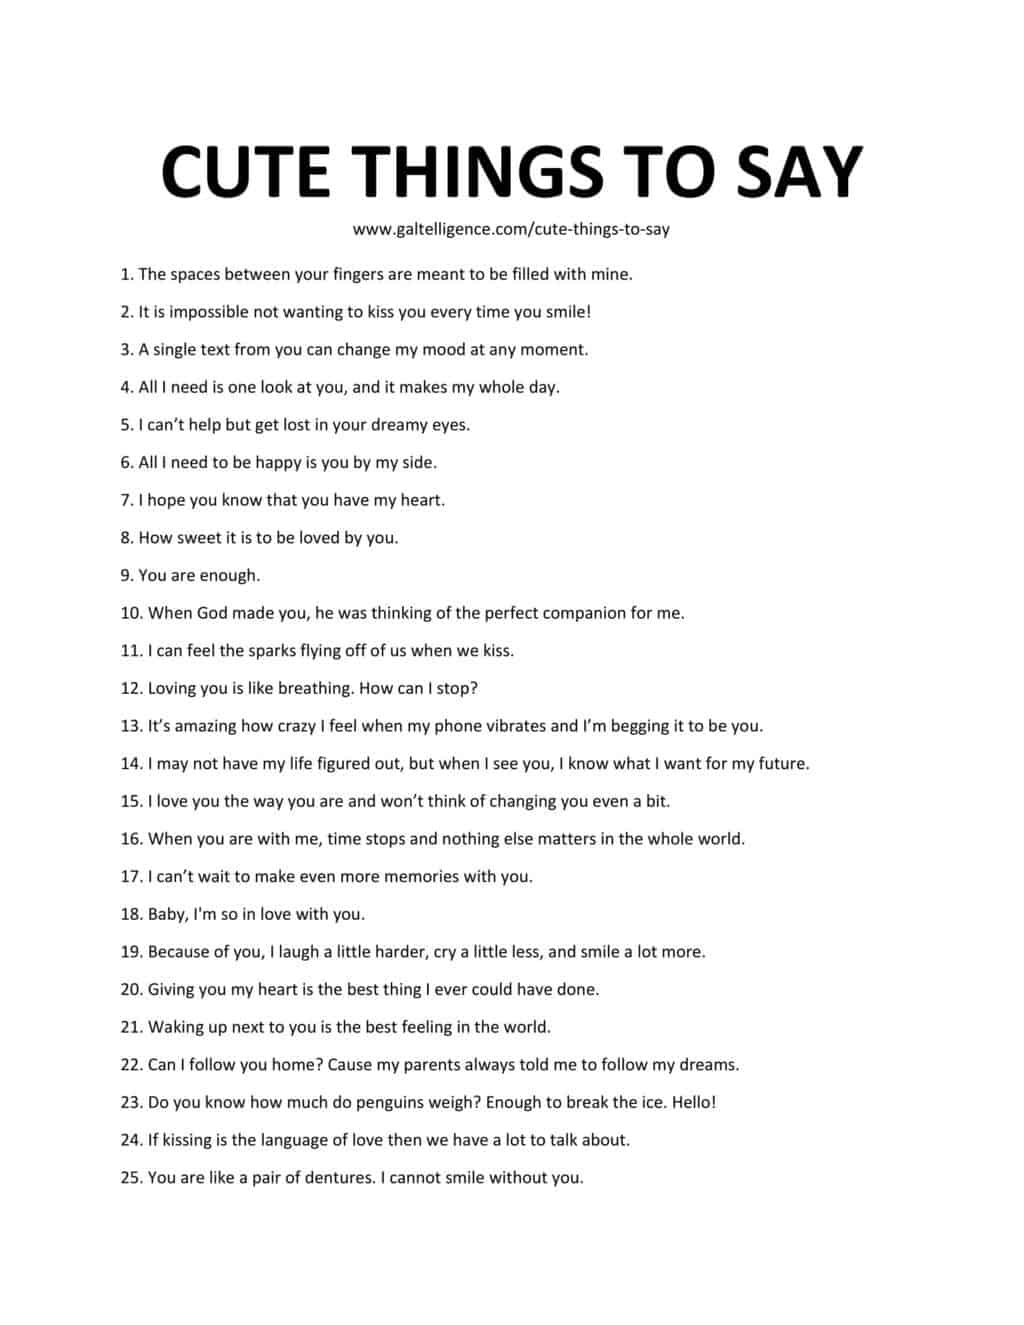 Downloadable and Printable List of Cute Things To Say